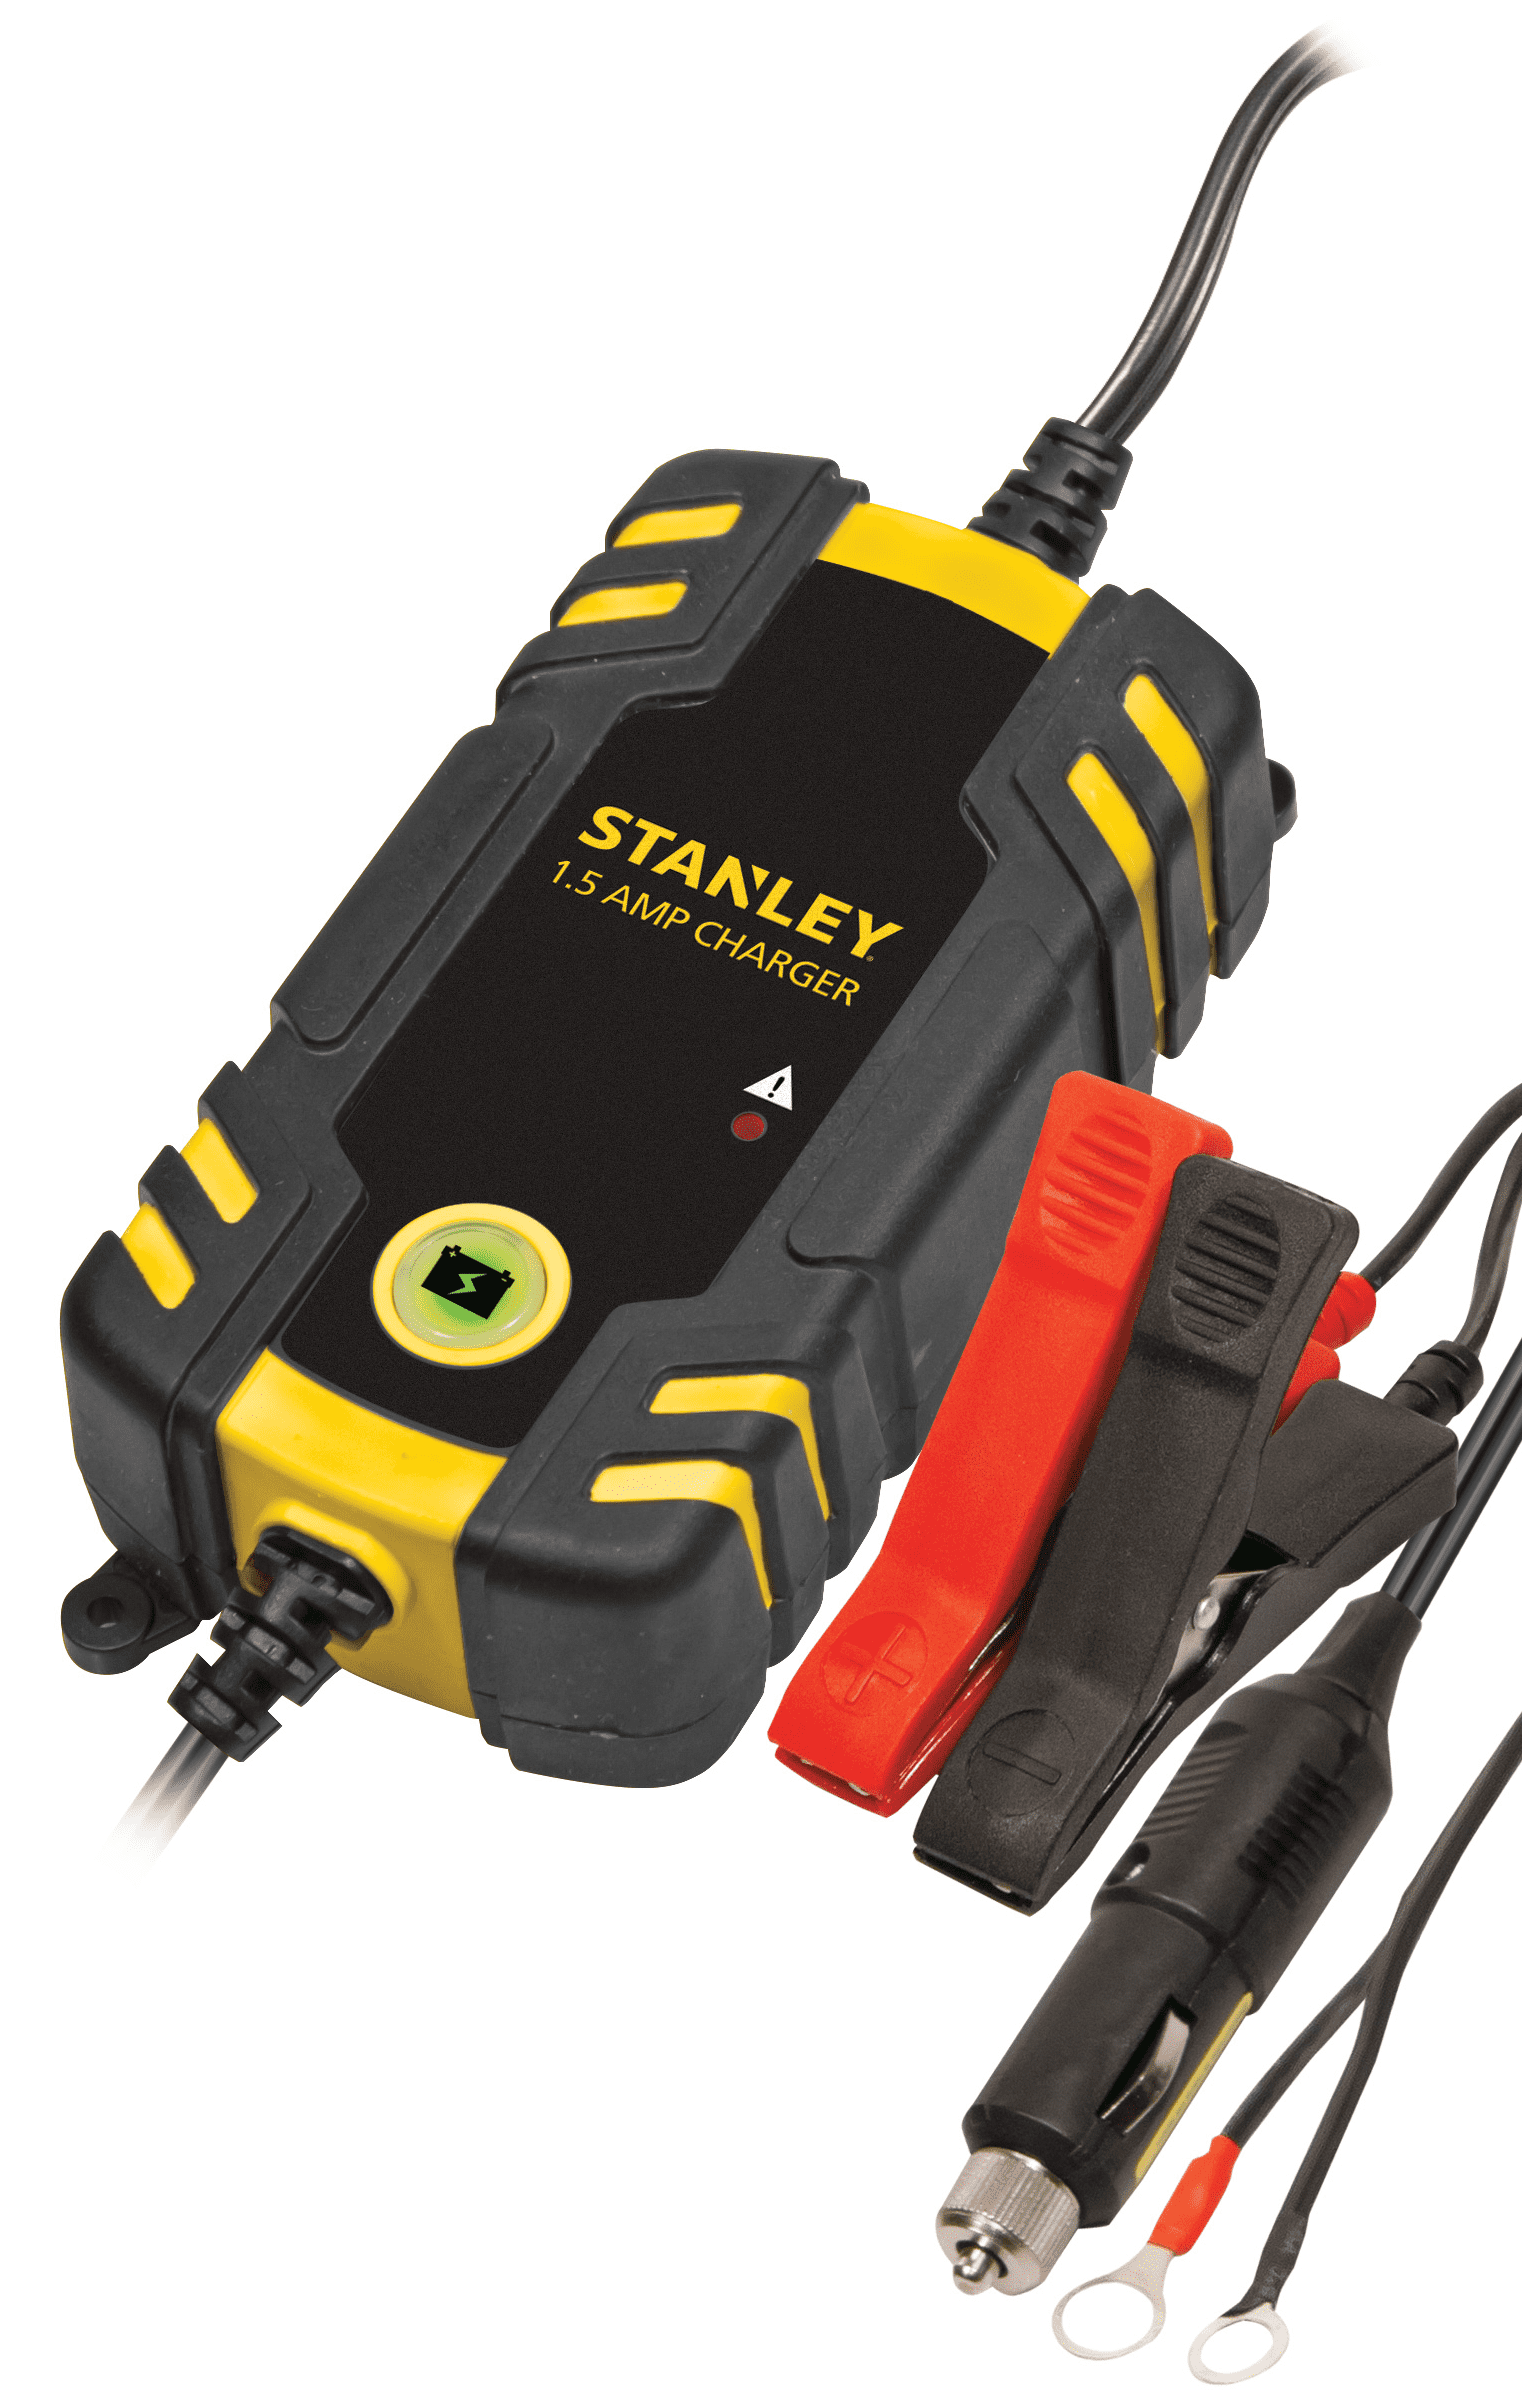 STANLEY BC209 1.5 Amp Battery Charger / Maintainer - Walmart.com